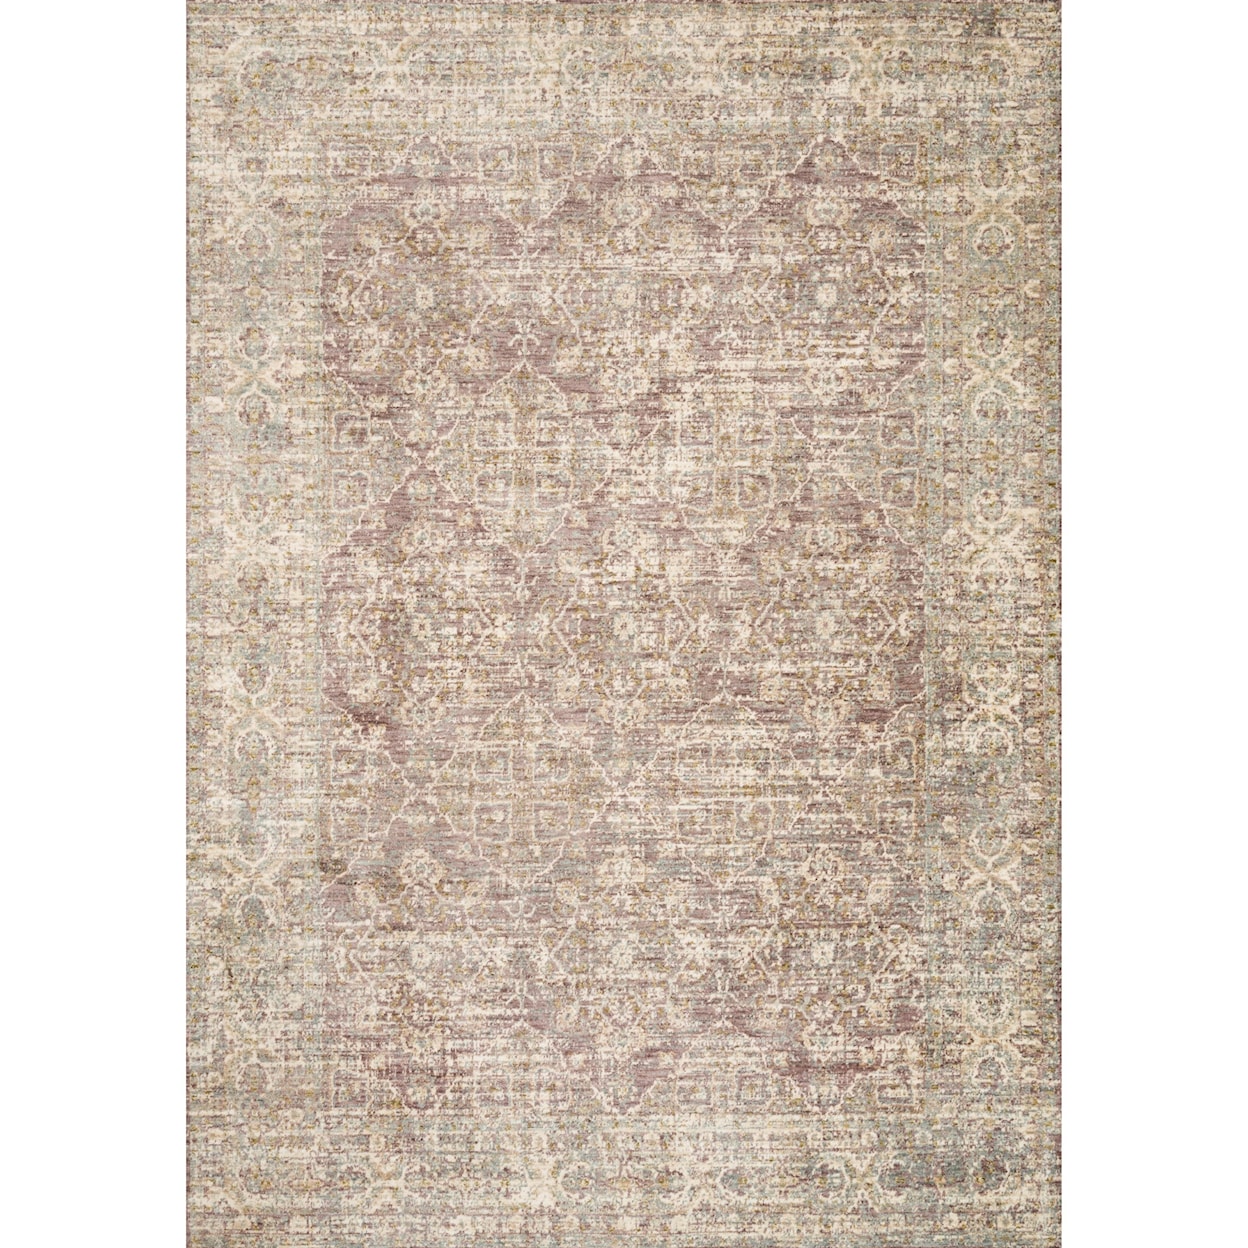 Reeds Rugs Revere 7'10" x 7'10" Round Lilac Rug